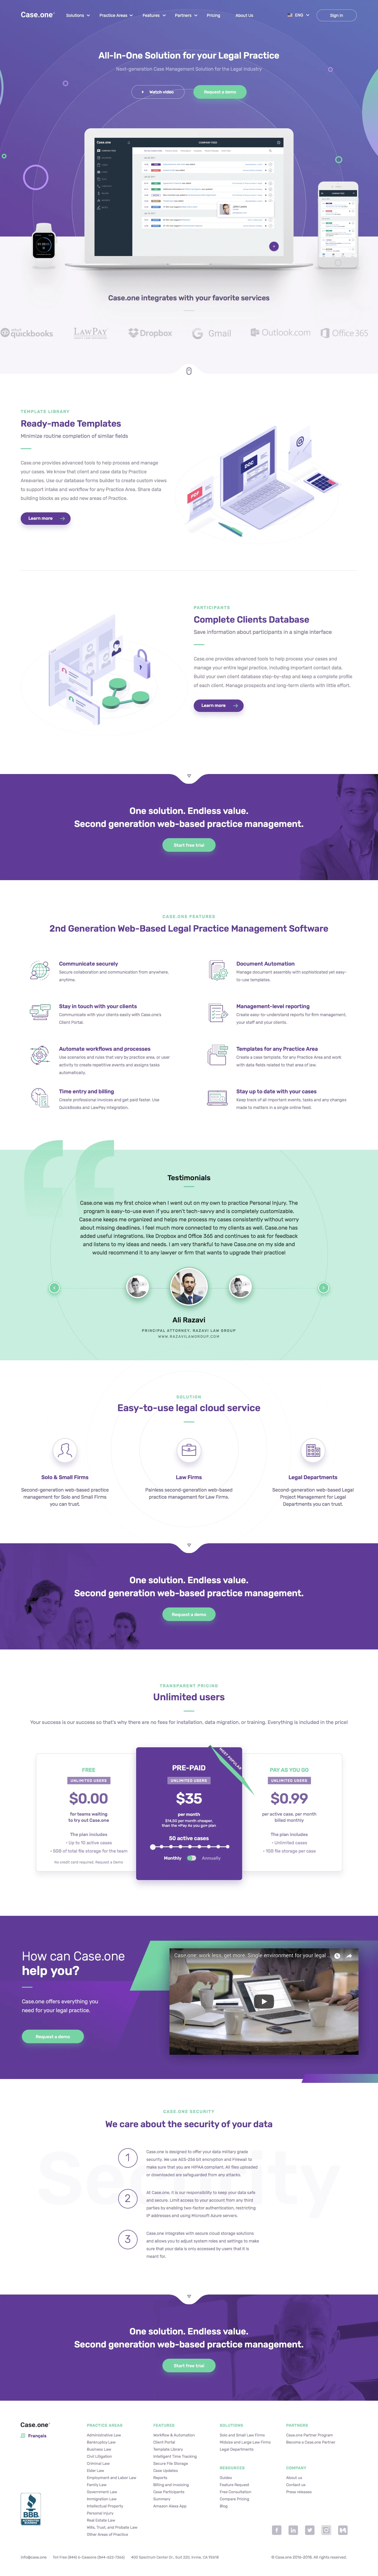 Case.one Landing Page Example: Case.one is an all-in-one yet easy-to-use case management system for the US legal industry. Enjoy advantages of a secure cloud-based software.